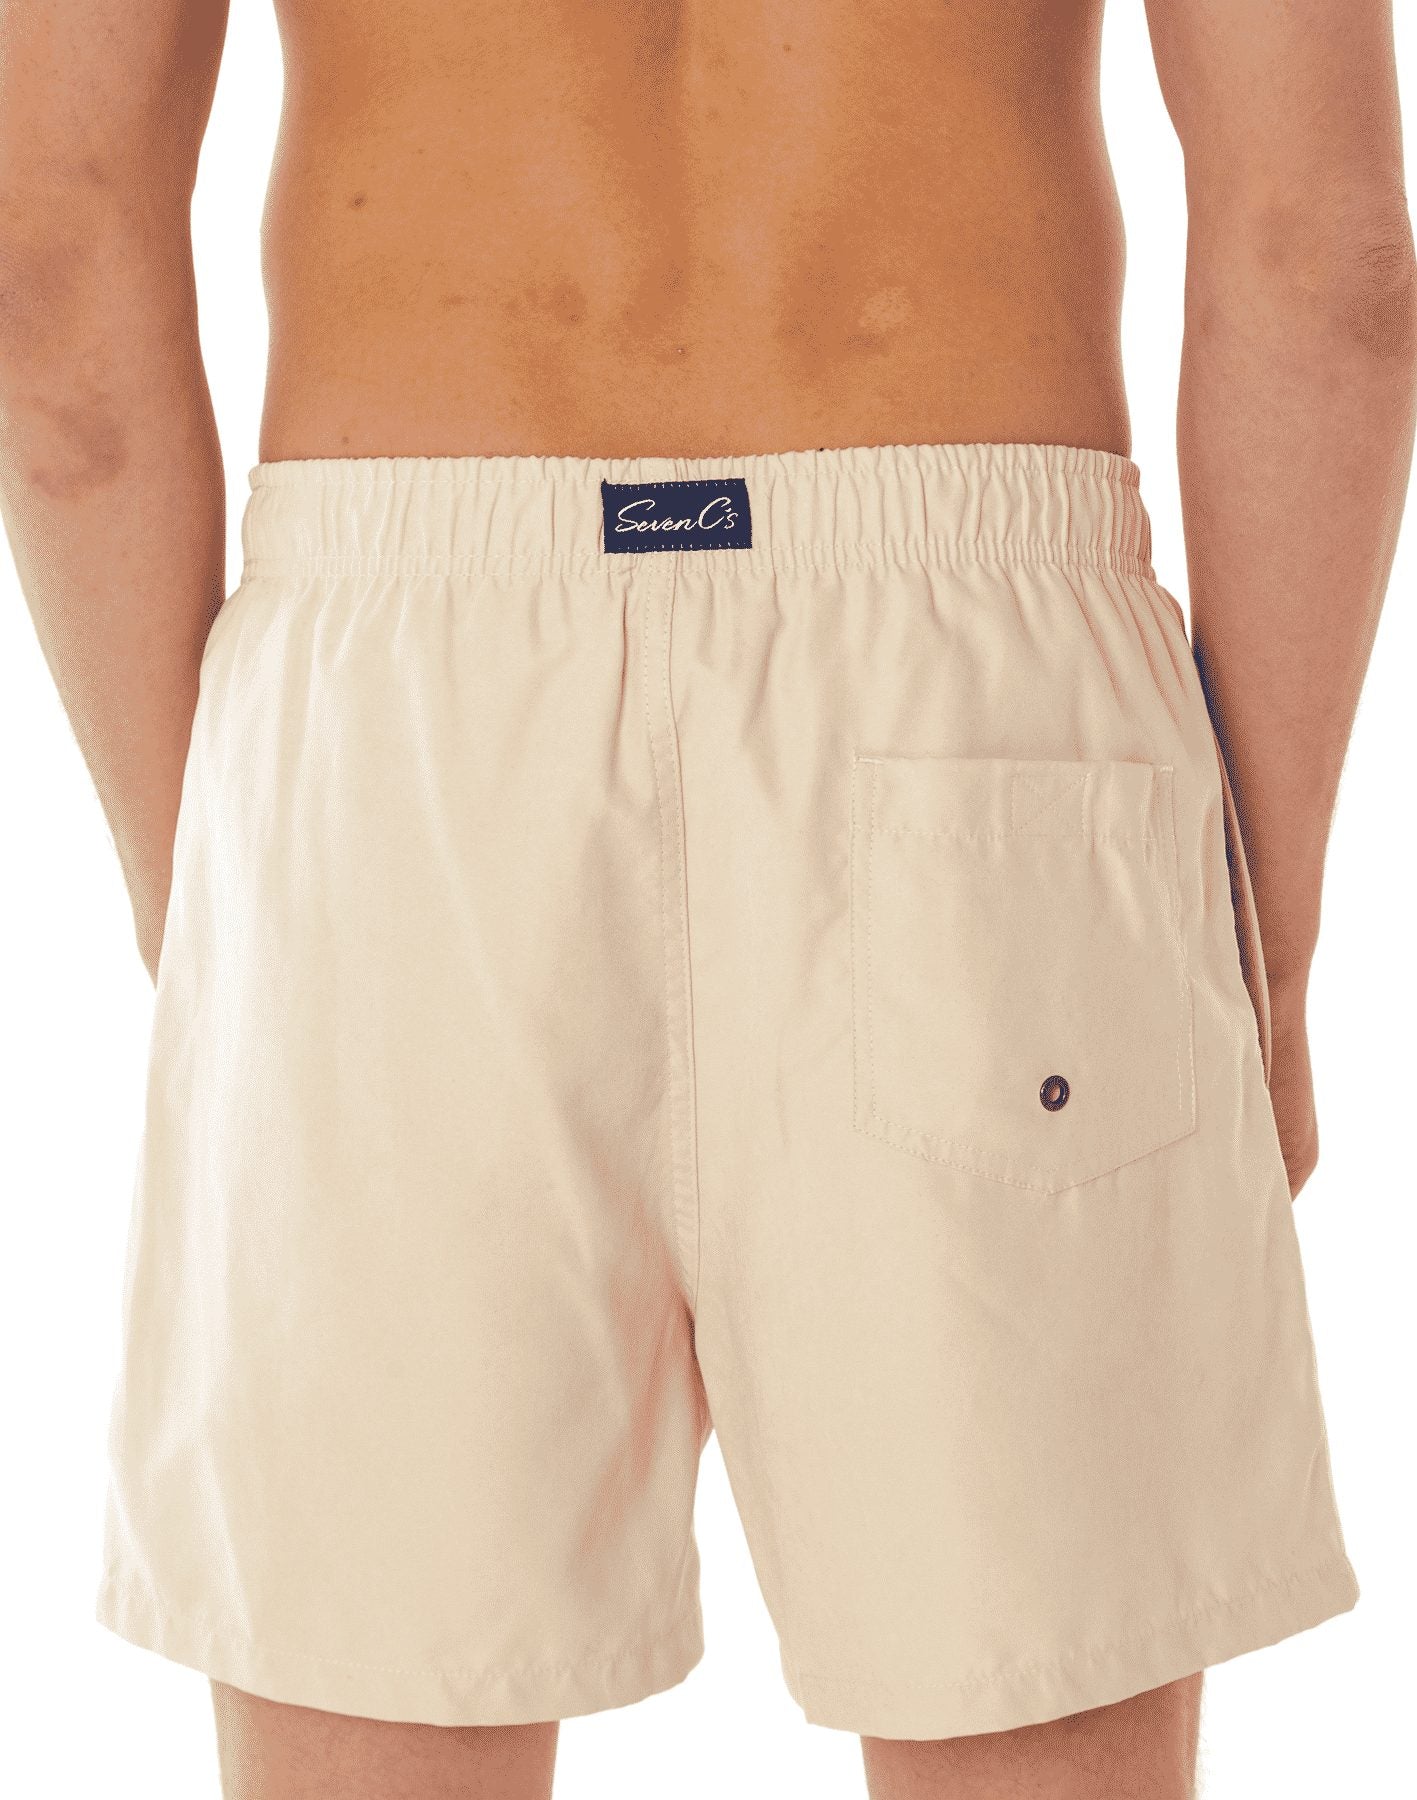 SevenC's Men's Recycled Polyester Shorts in Sand Stone - Back View